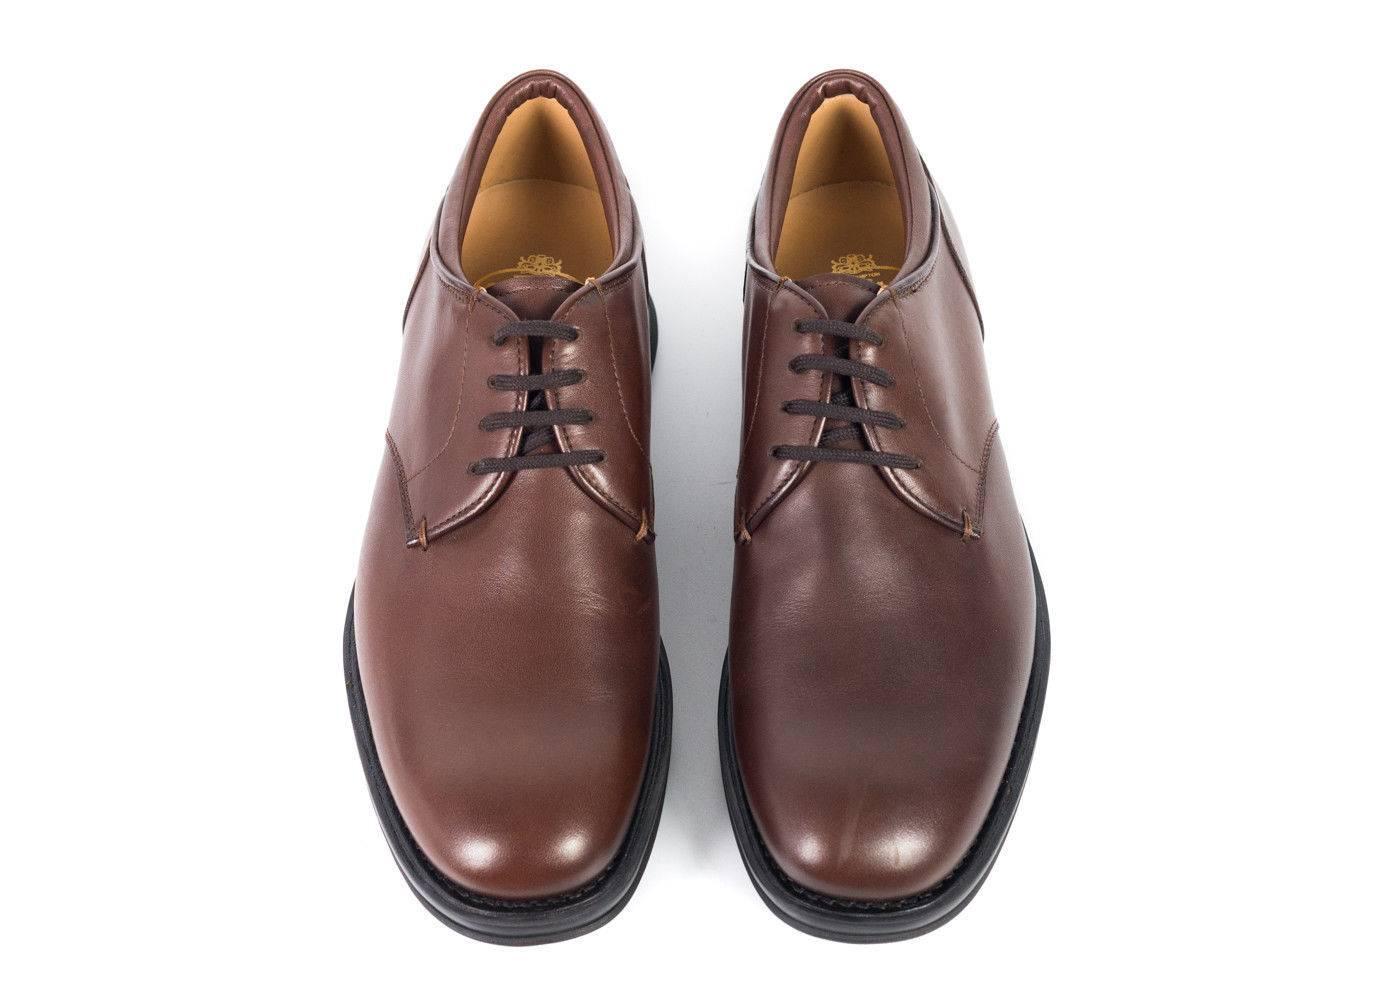 Church's lace up shoes in a gorgeous brown leather. These lace up shoes are perfect for professional occasions or worn as a trendy casual look. Pair it with a pair of culottes or black jeans with a striped button down or feminine blouse for a chic